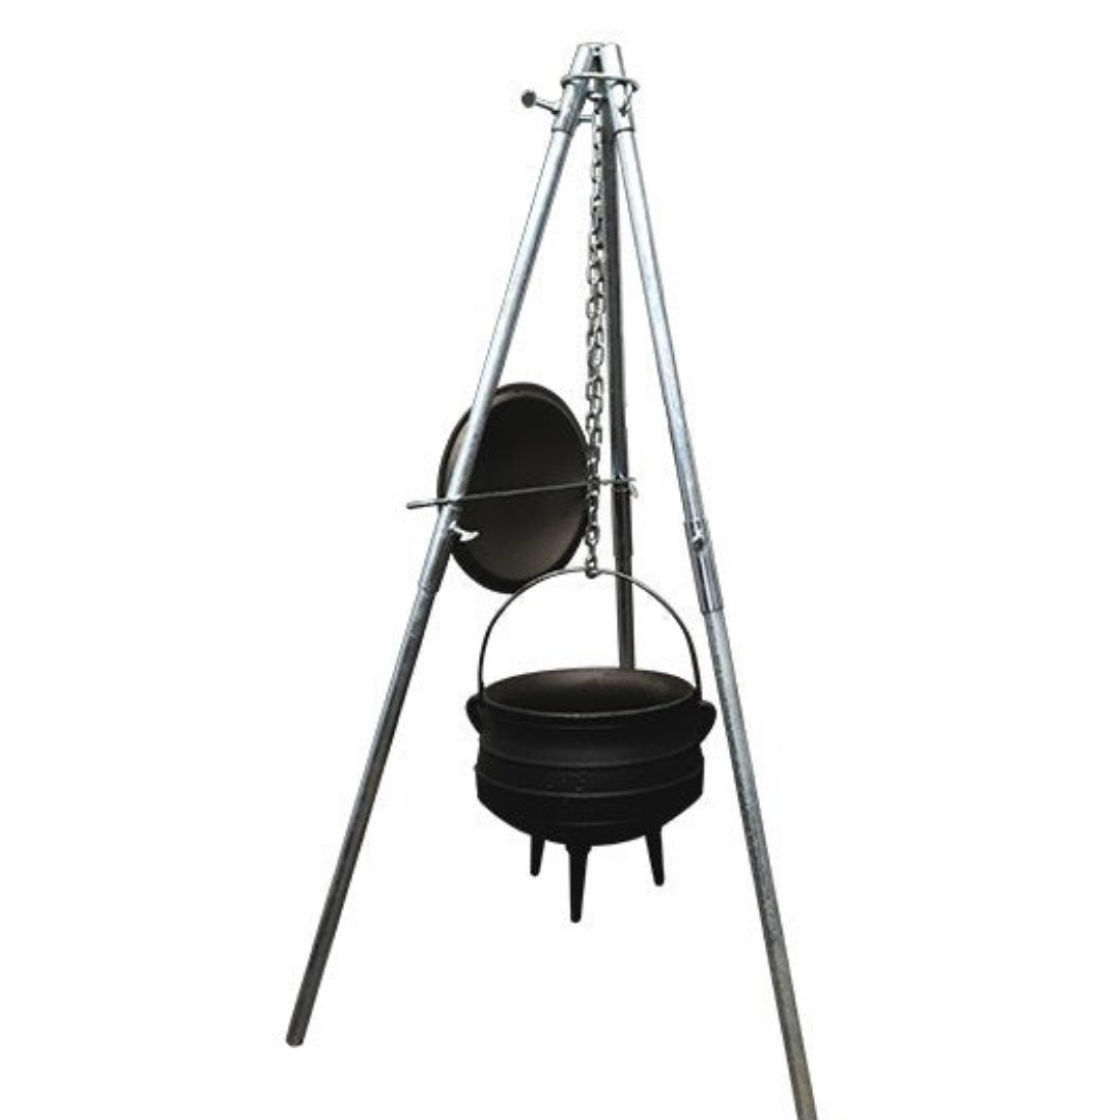 Potjie Pot Campfire Tripod with Chain - Foldable